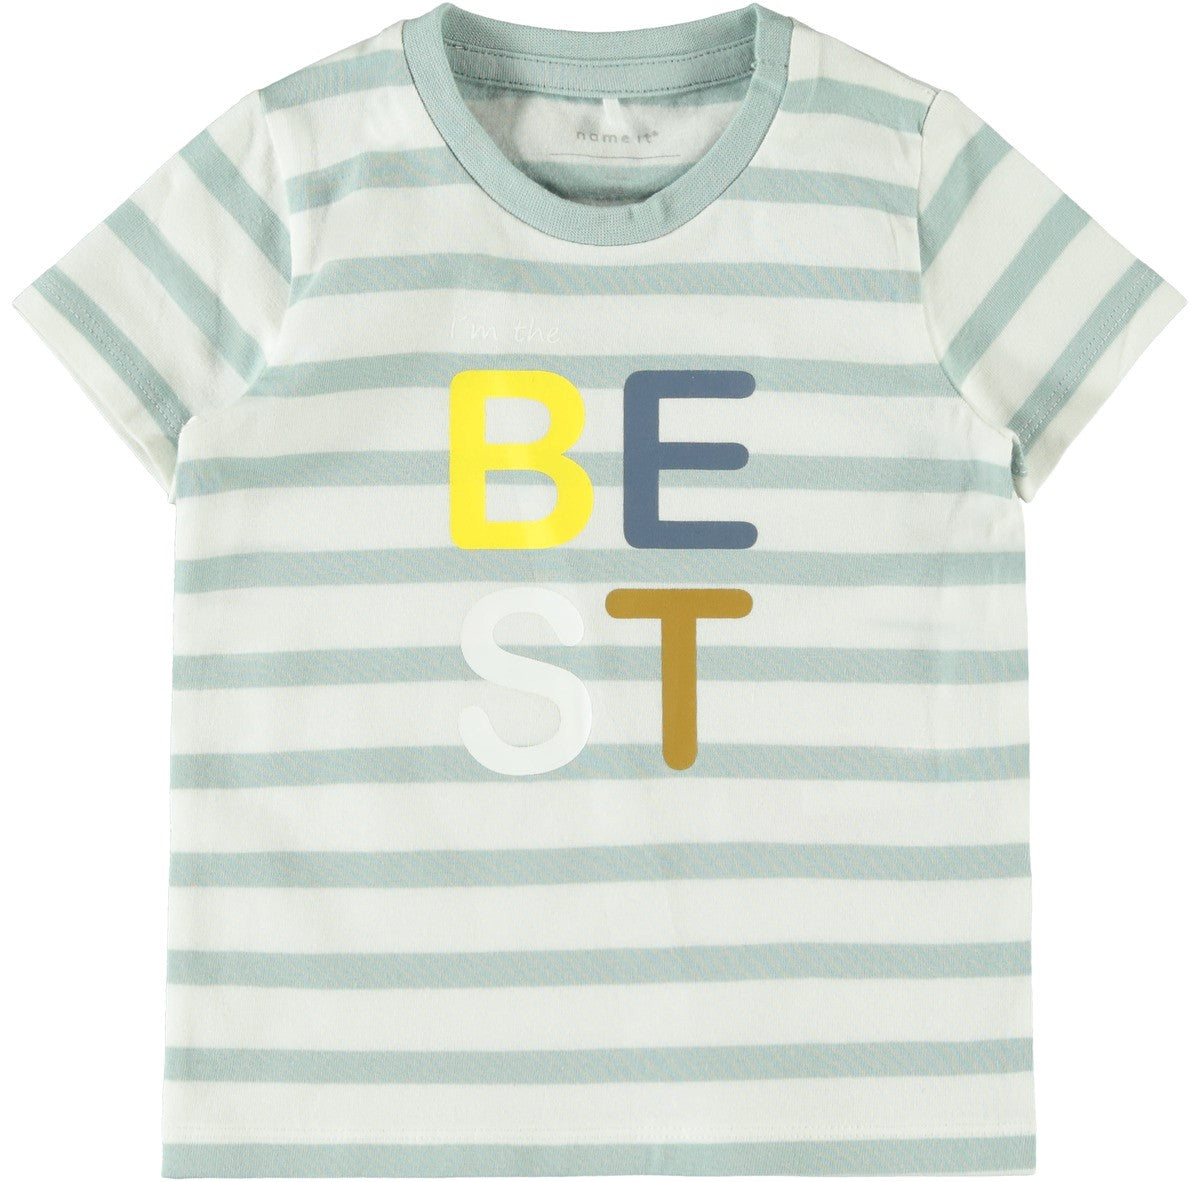 Name it Baby Boy "I'm The Best" Short Sleeve Top